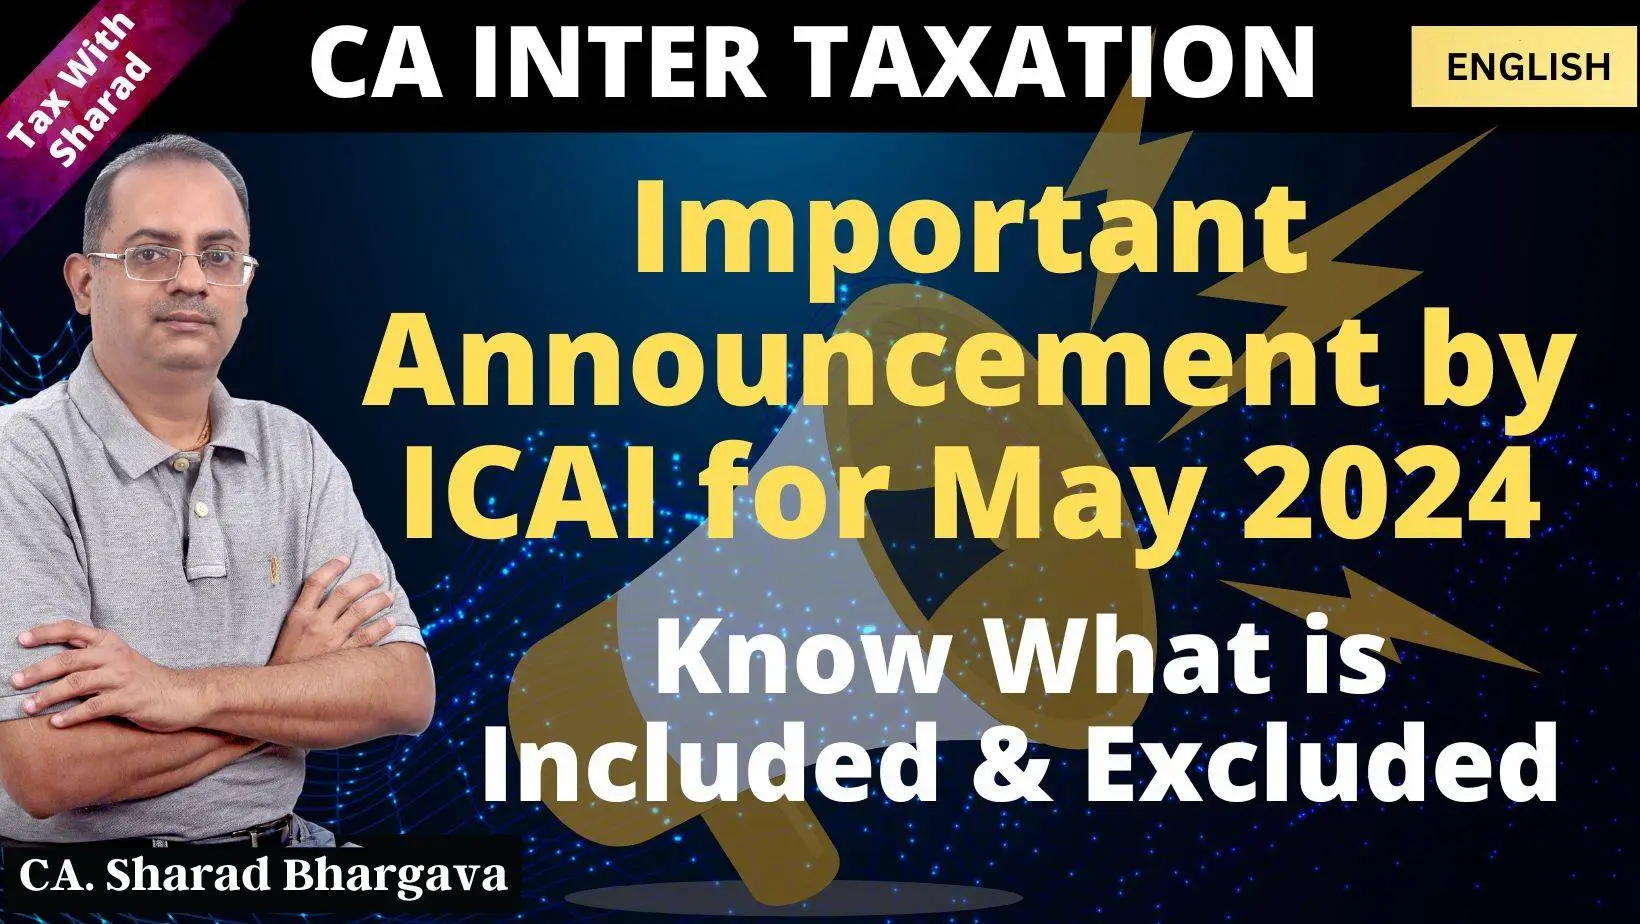 CA Inter May 24 / Important Announcement by ICAI / What is Included & Excluded / CA. Sharad Bhargava